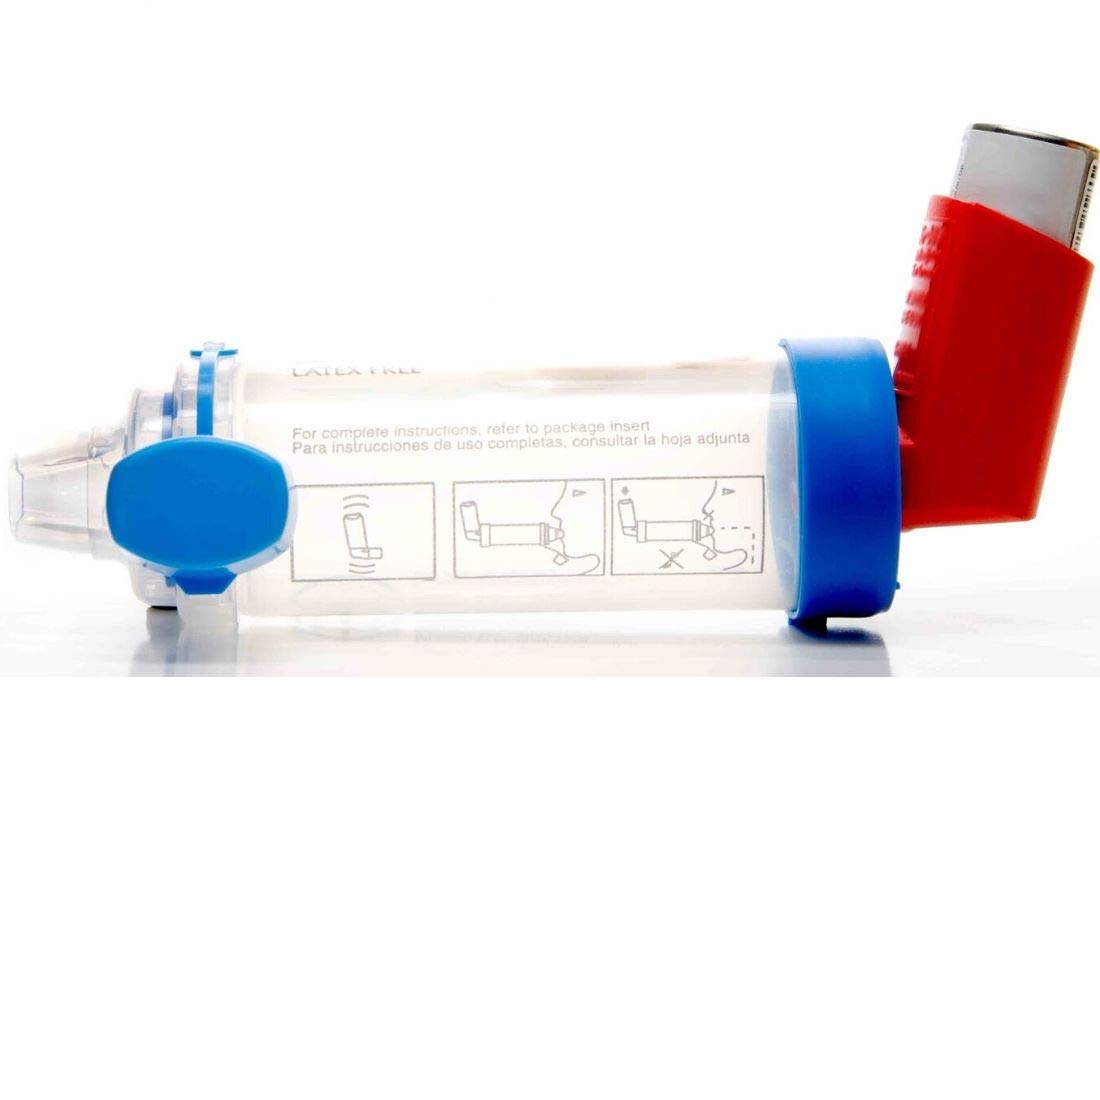 Hot sell Asthma Spacer Asthma Inhaler Spacer For Aerosol